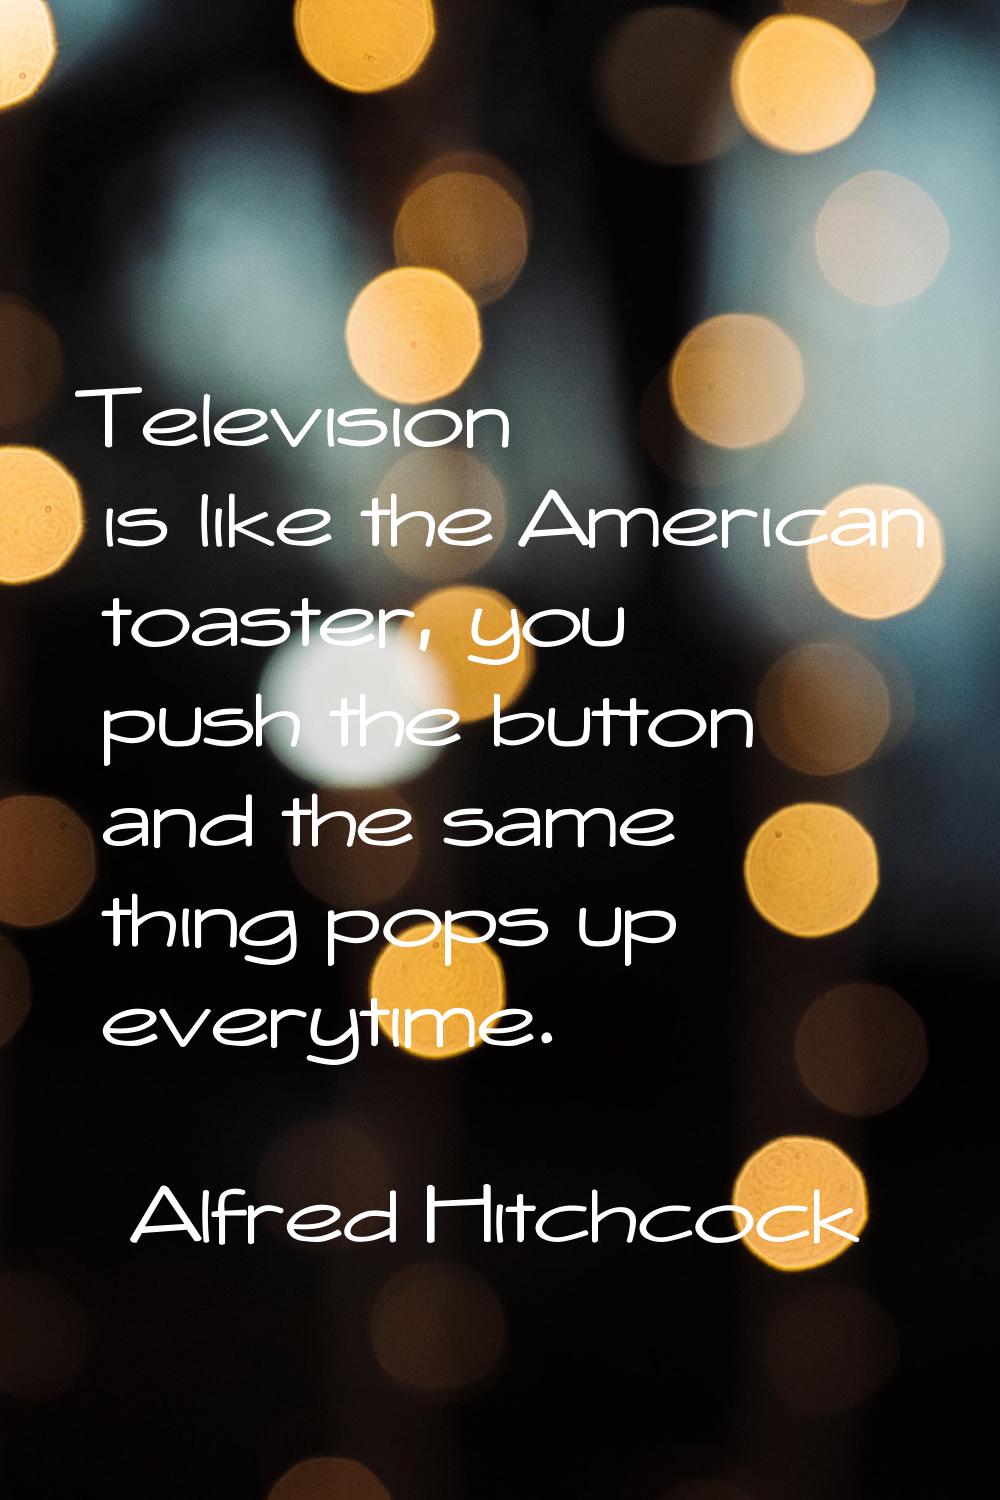 Television is like the American toaster, you push the button and the same thing pops up everytime.